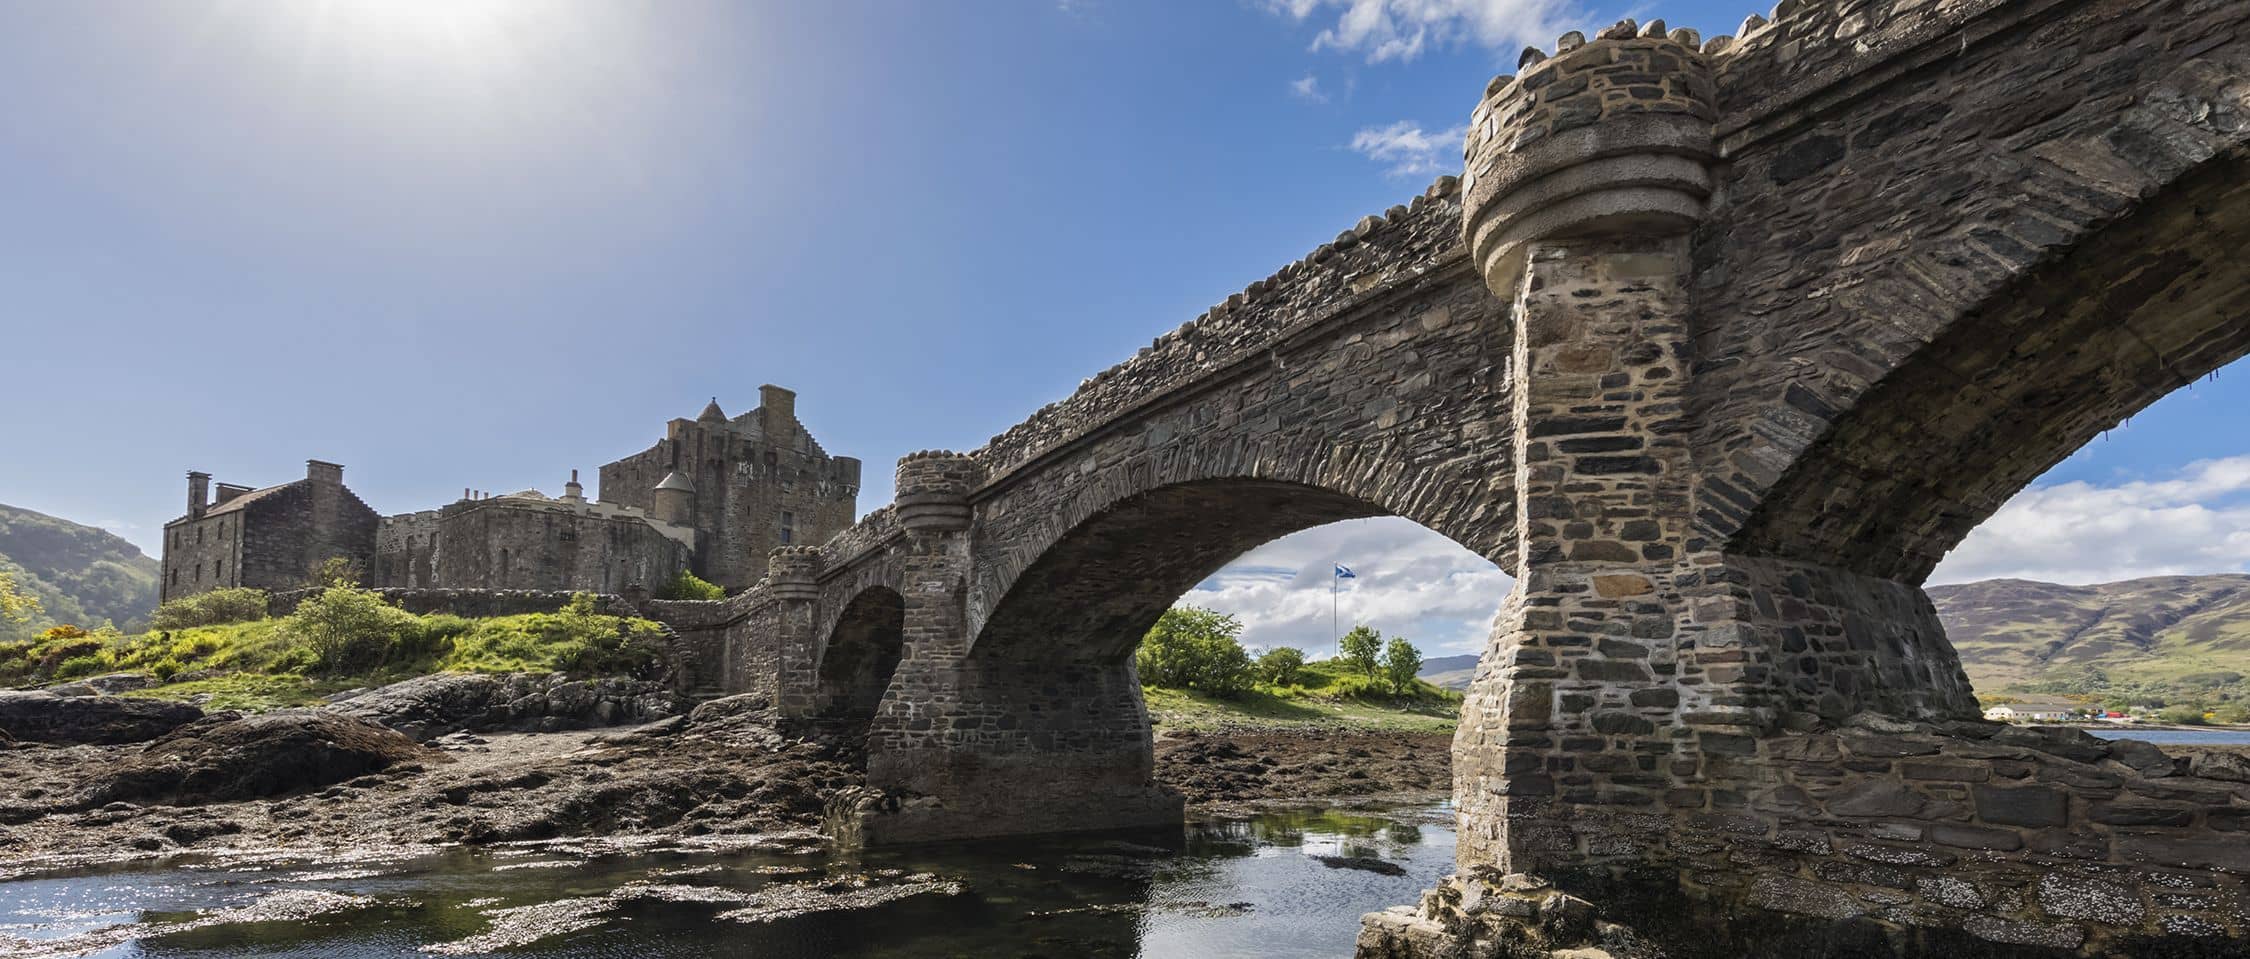 A stone bridge leads to Eilean Donan Castle, an iconic Scottish landmark set against a backdrop of sunshine and reflective waters.